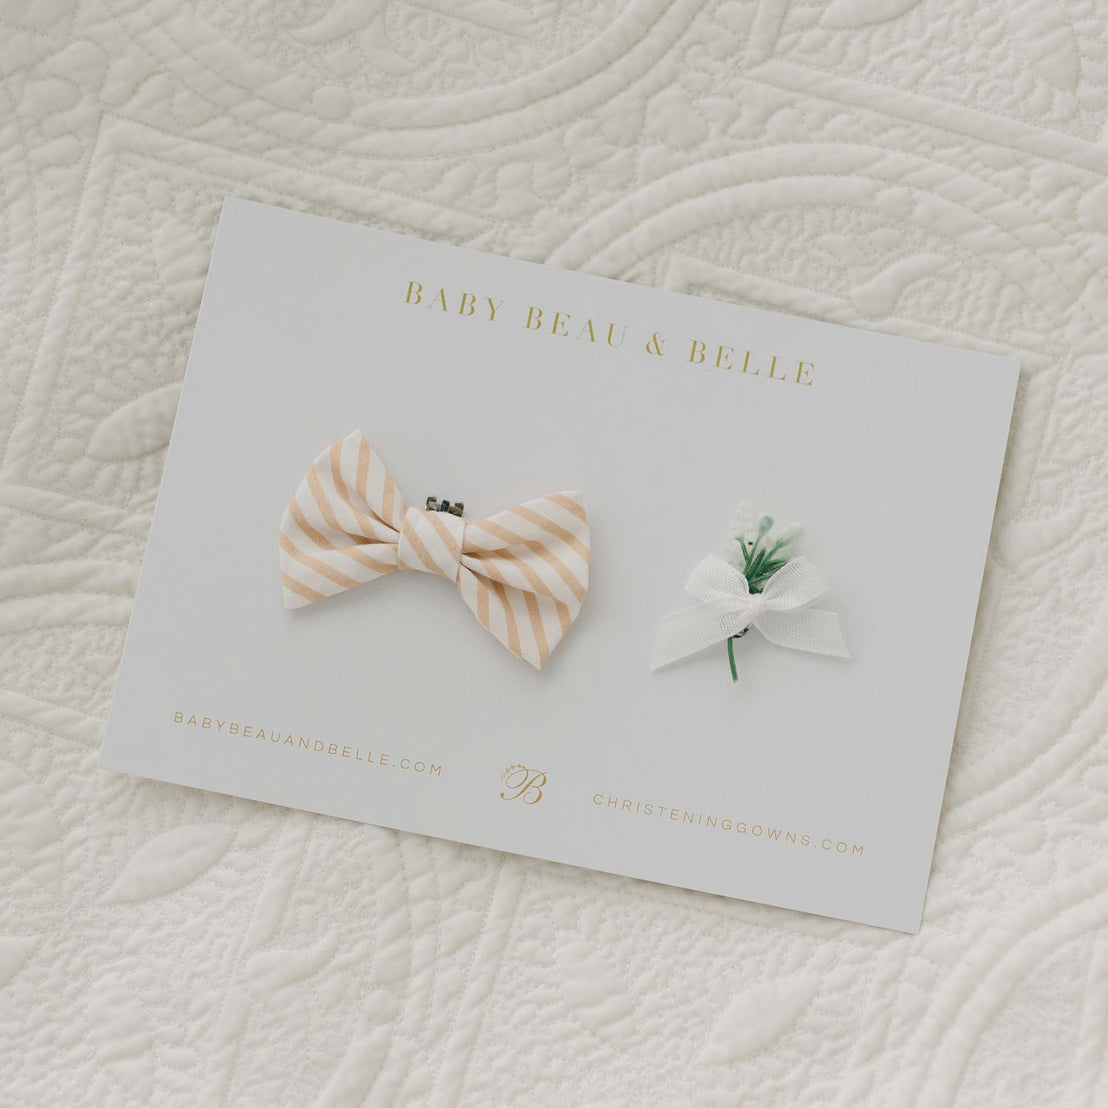 A card labeled "Theodore Bow Tie & Boutonniere" showcases a handmade bow tie crafted from beige and white striped cotton, accompanied by a small white flower with a ribbon. The card is placed on quilted white fabric, with "babybeauandbelle.com" and "christeninggowns.com" printed at the bottom.